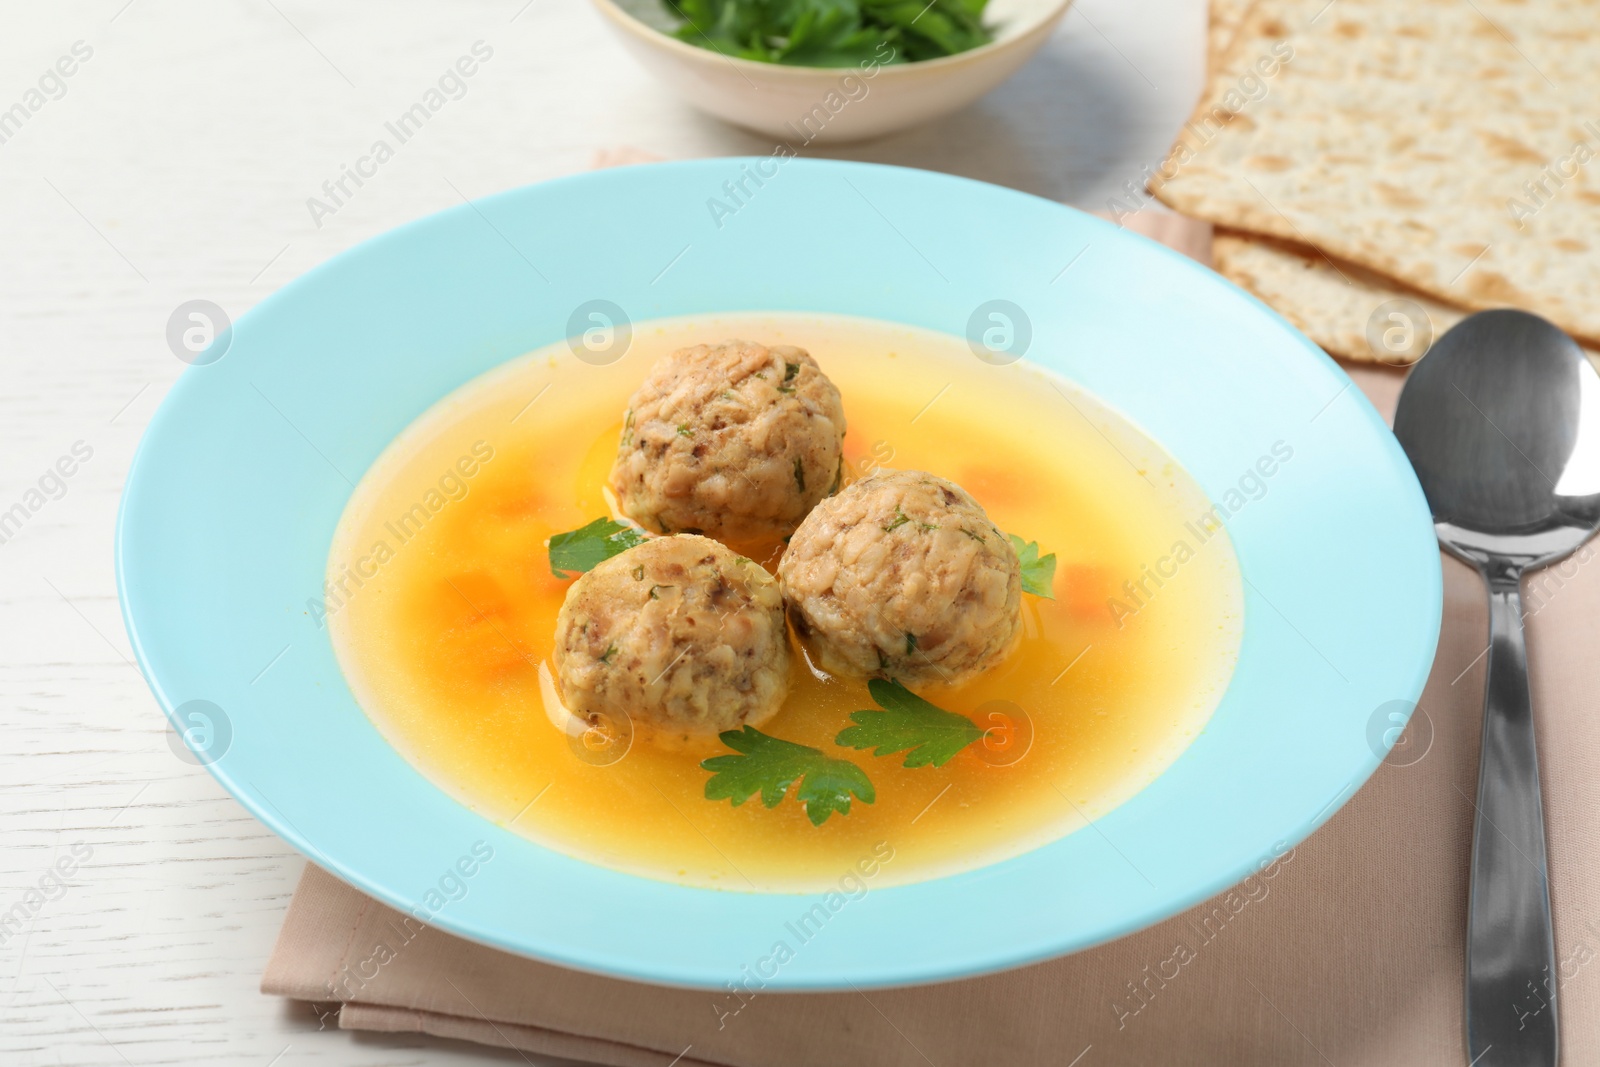 Photo of Dish of Jewish matzoh balls soup on white wooden table